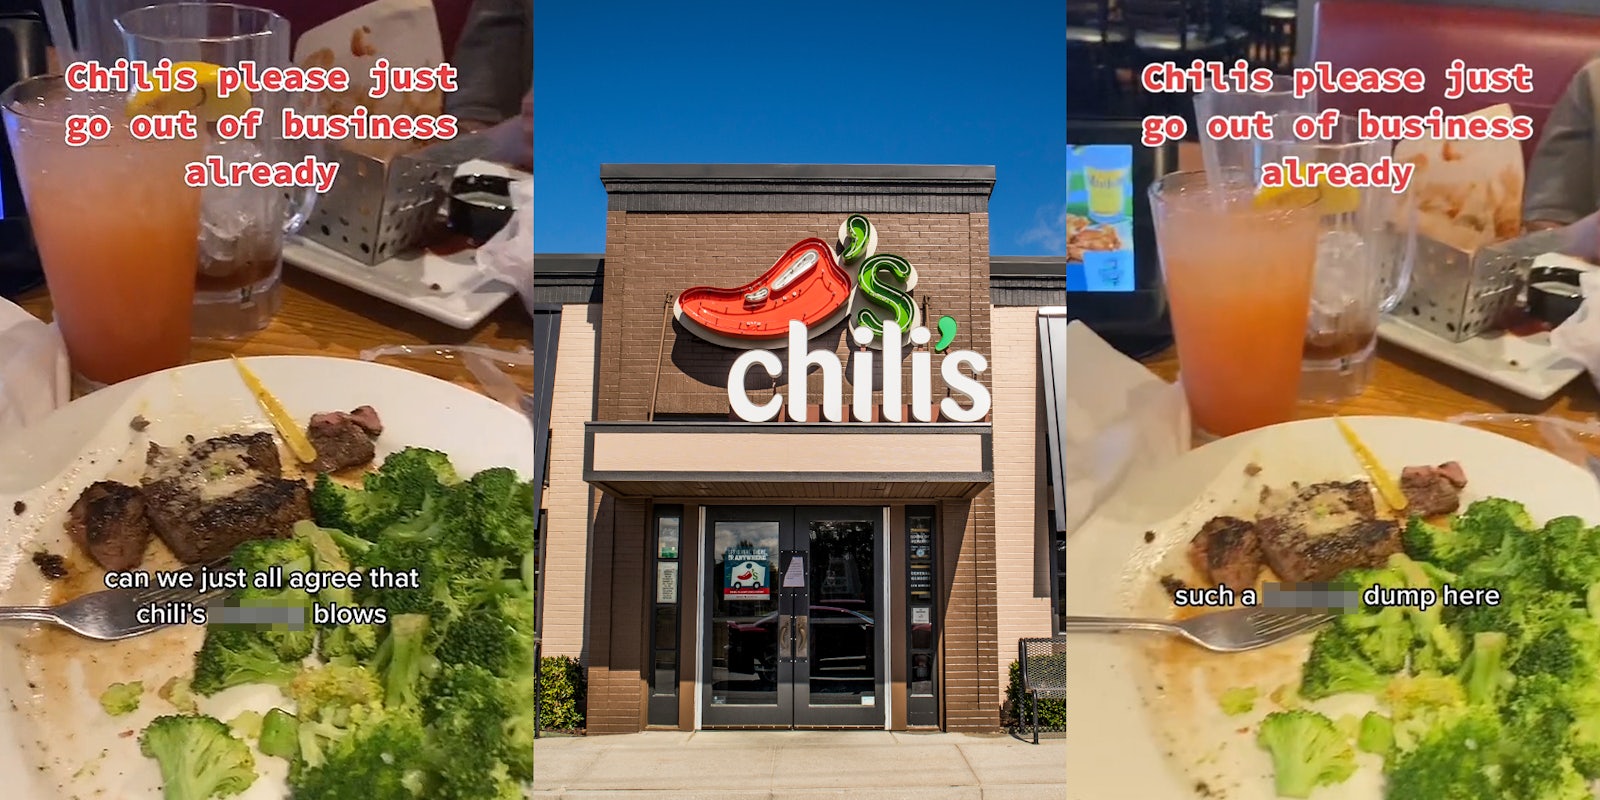 Chili's steak and broccoli on plate caption 'Chilis please just go out of business already' 'can we just all agree chili's blank blows' (l) Chili's restaurant building with sign (c) Chili's steak and broccoli on plate caption 'Chilis please just go out of business already' 'such a blank dump here' (r)